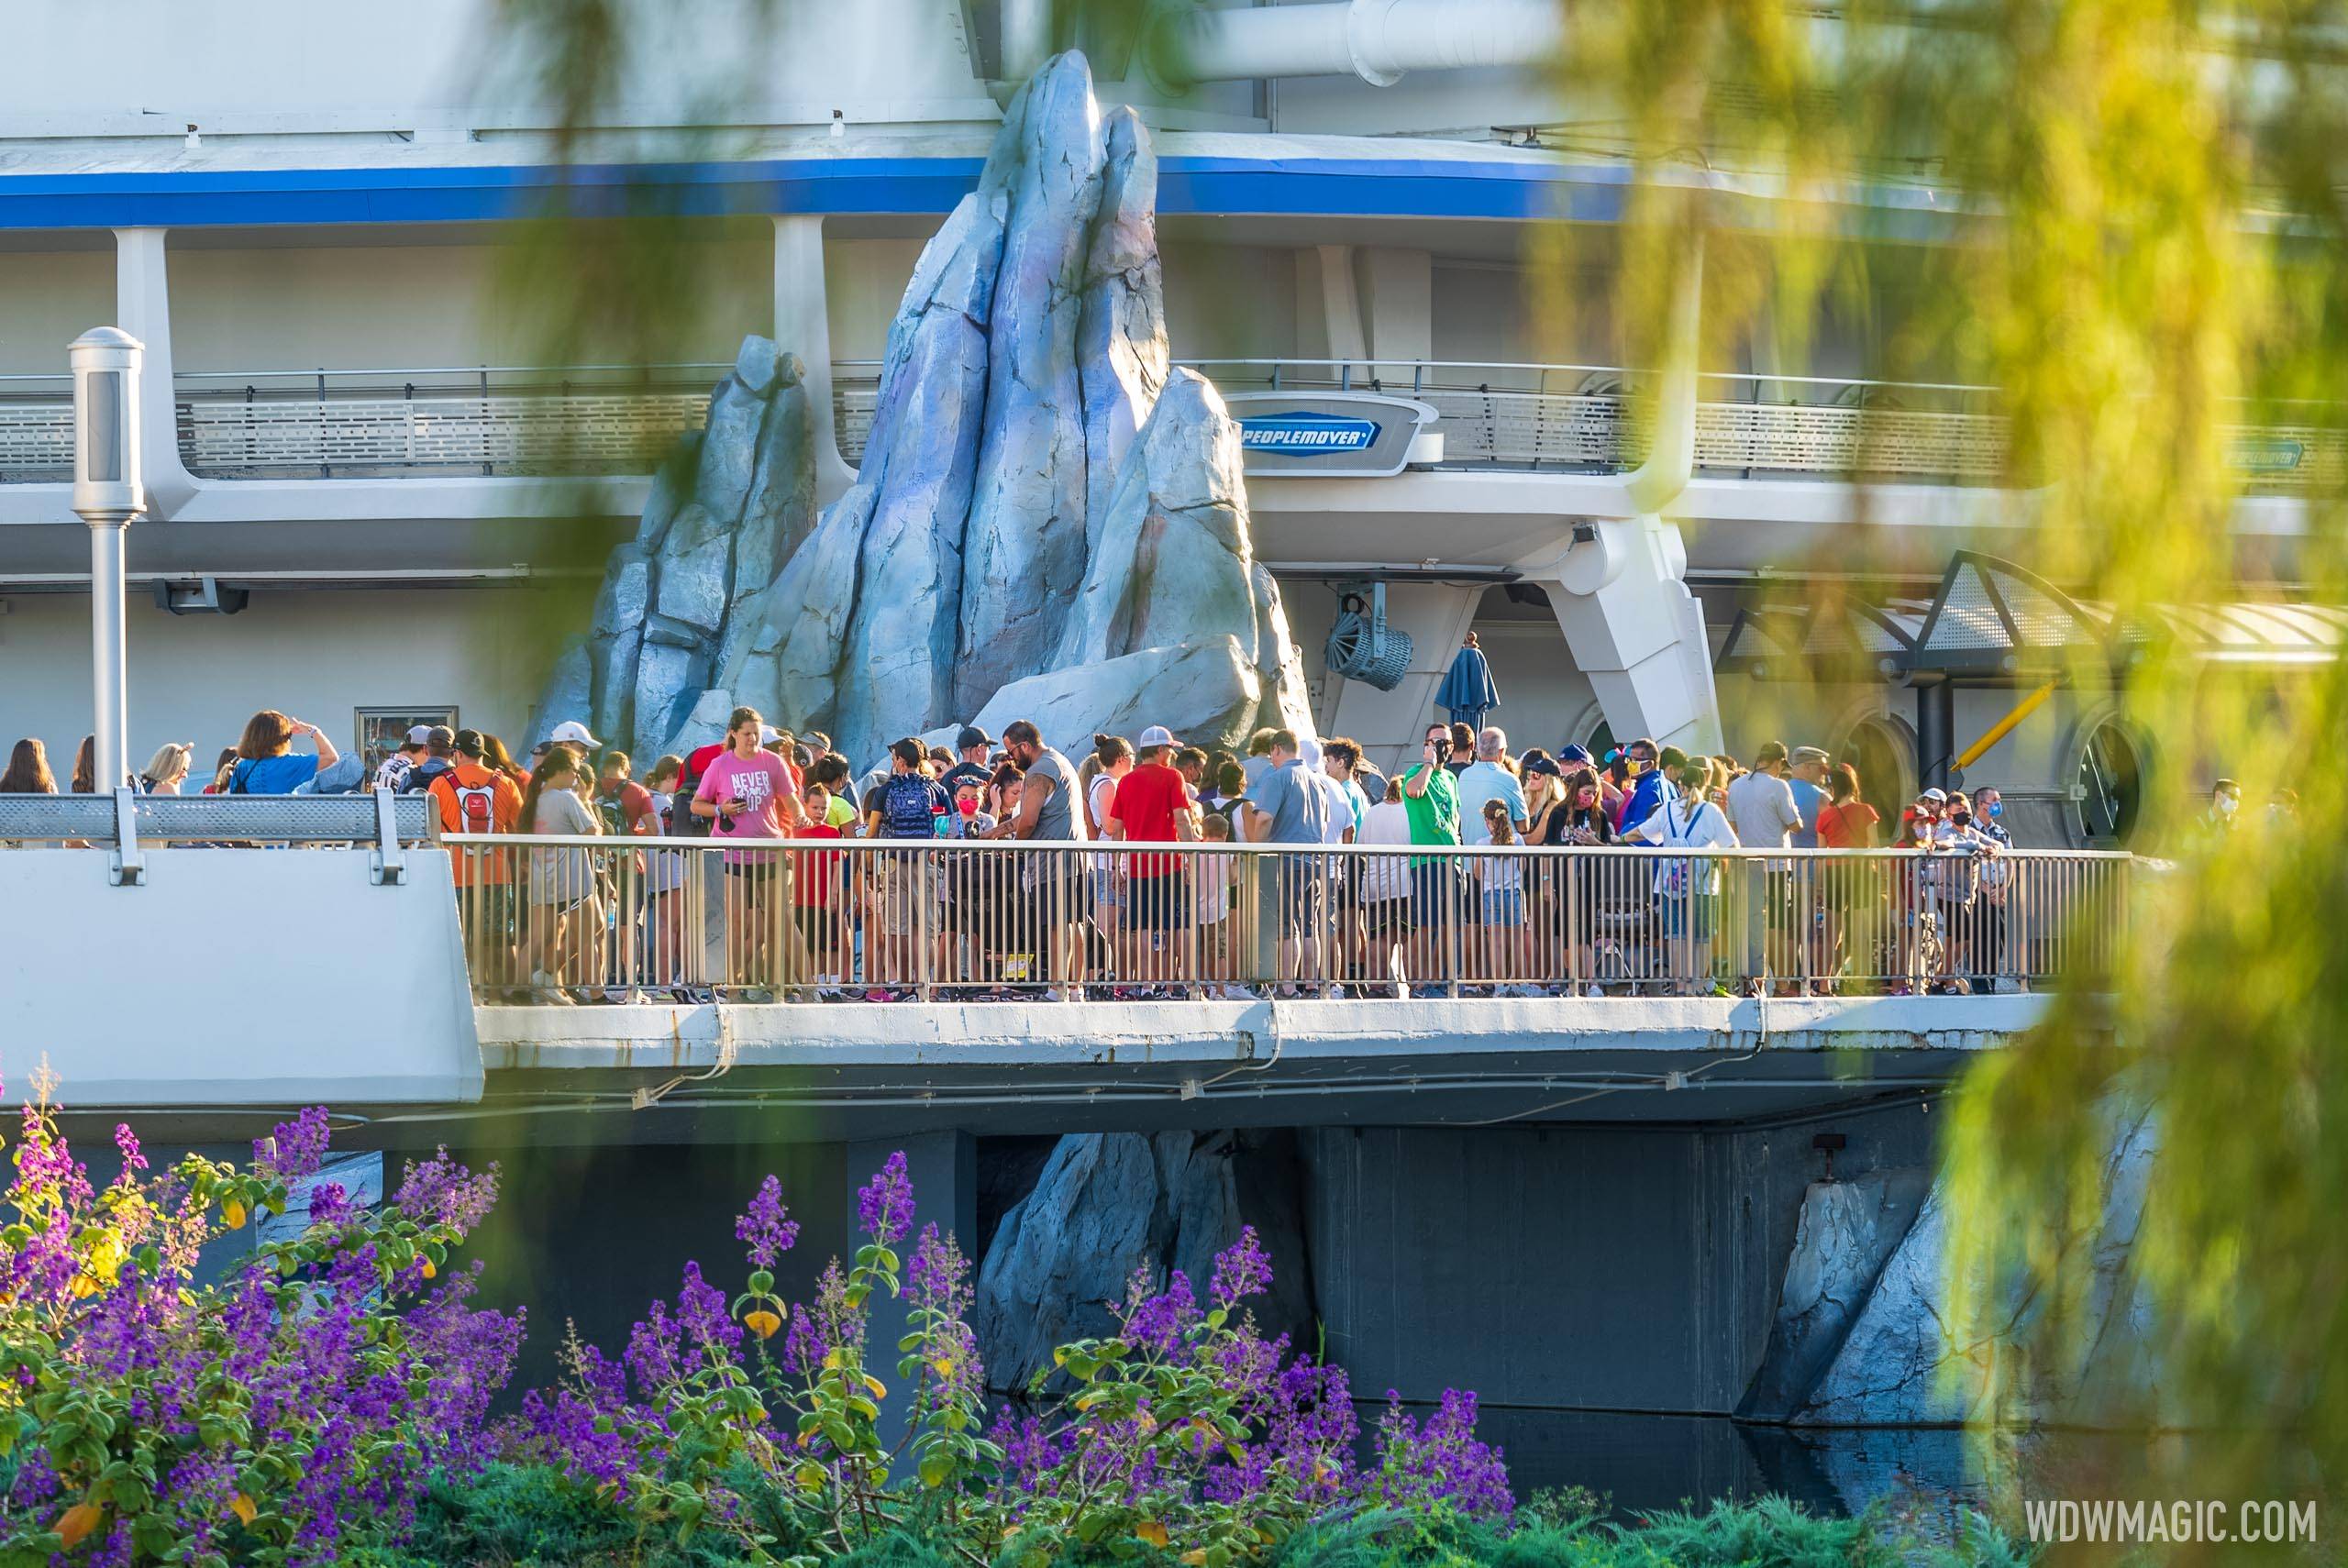 Resort hotel guests waiting at the Tomorrowland Rope drop at 8:25am ahead of the 8:30am rope drop